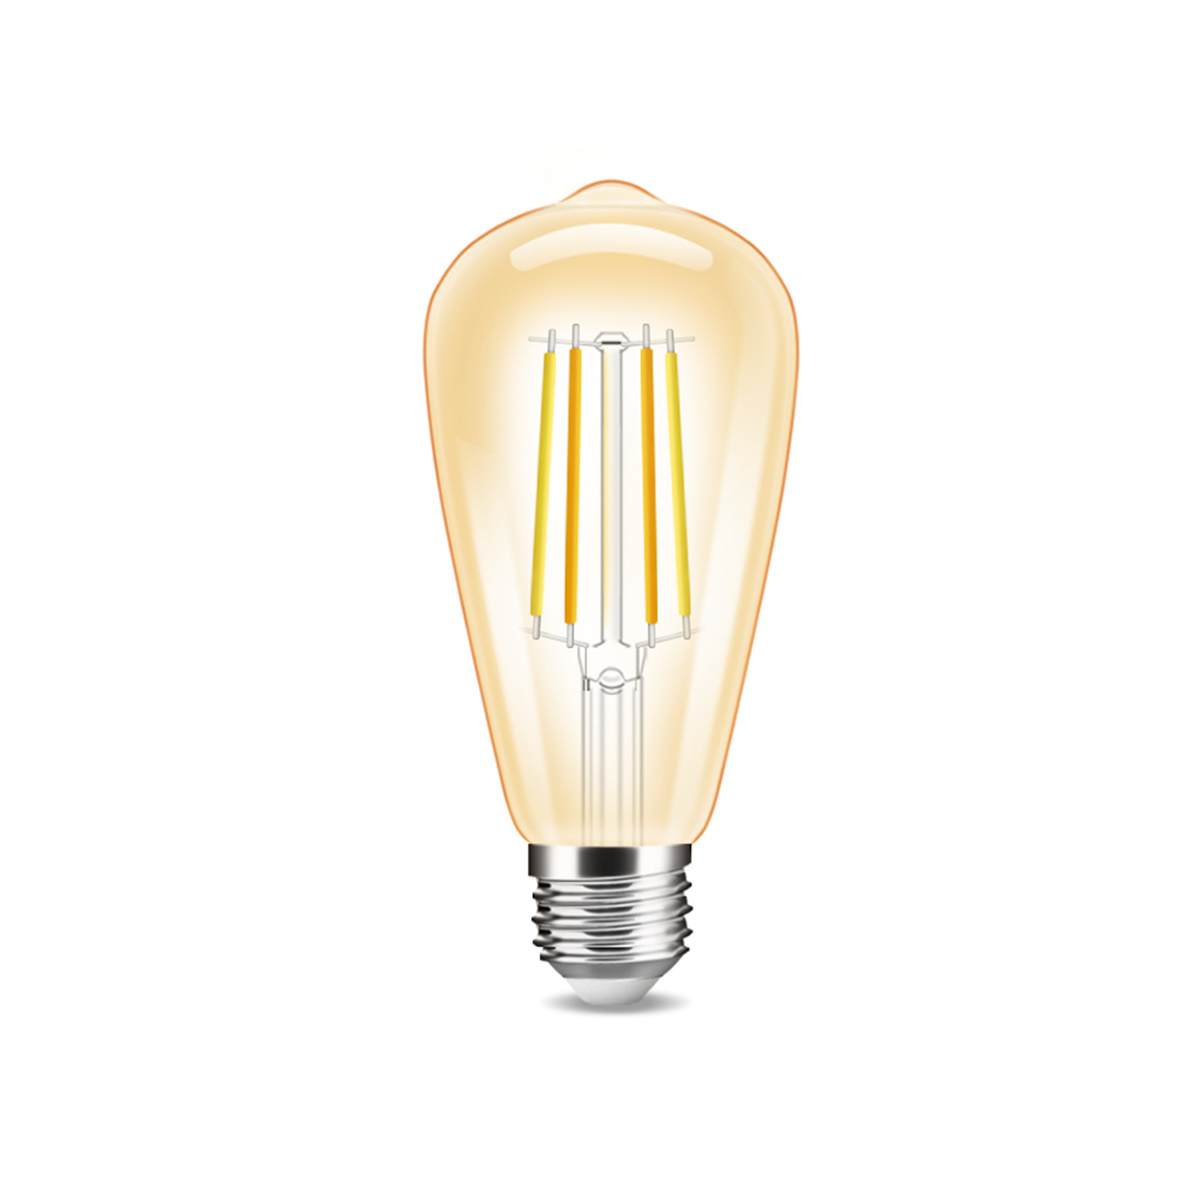 Reasonable price Wiz Light Bulb - Dimmable Smart Filament Bulb E27 Vintage With tunable white 2200-6500K CBS – C-Lux